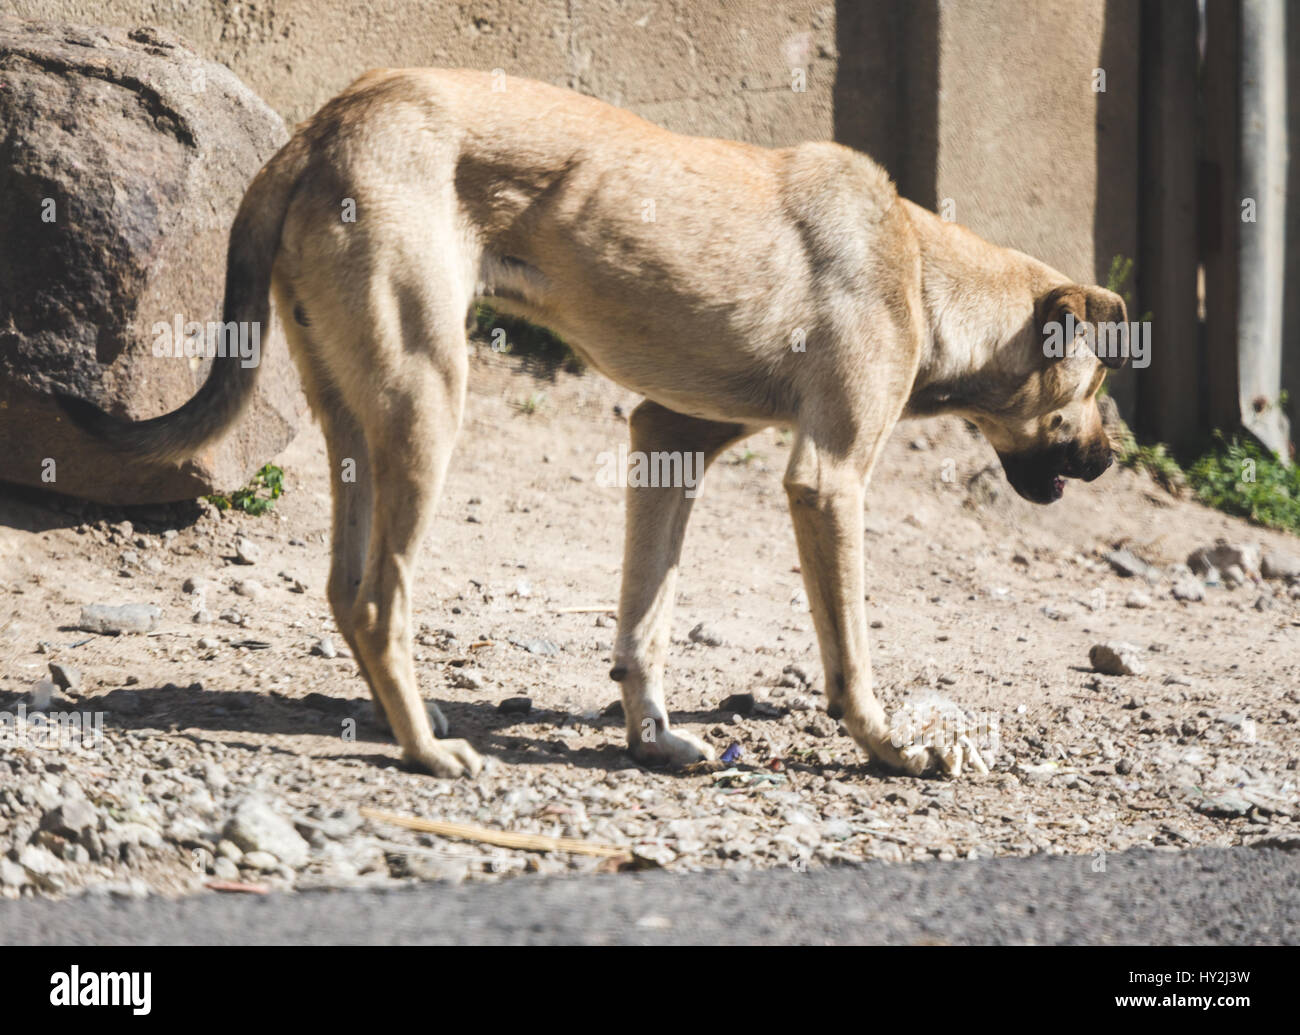 Stray dog walking near the road in rural Guatemala, Central America. Stock Photo